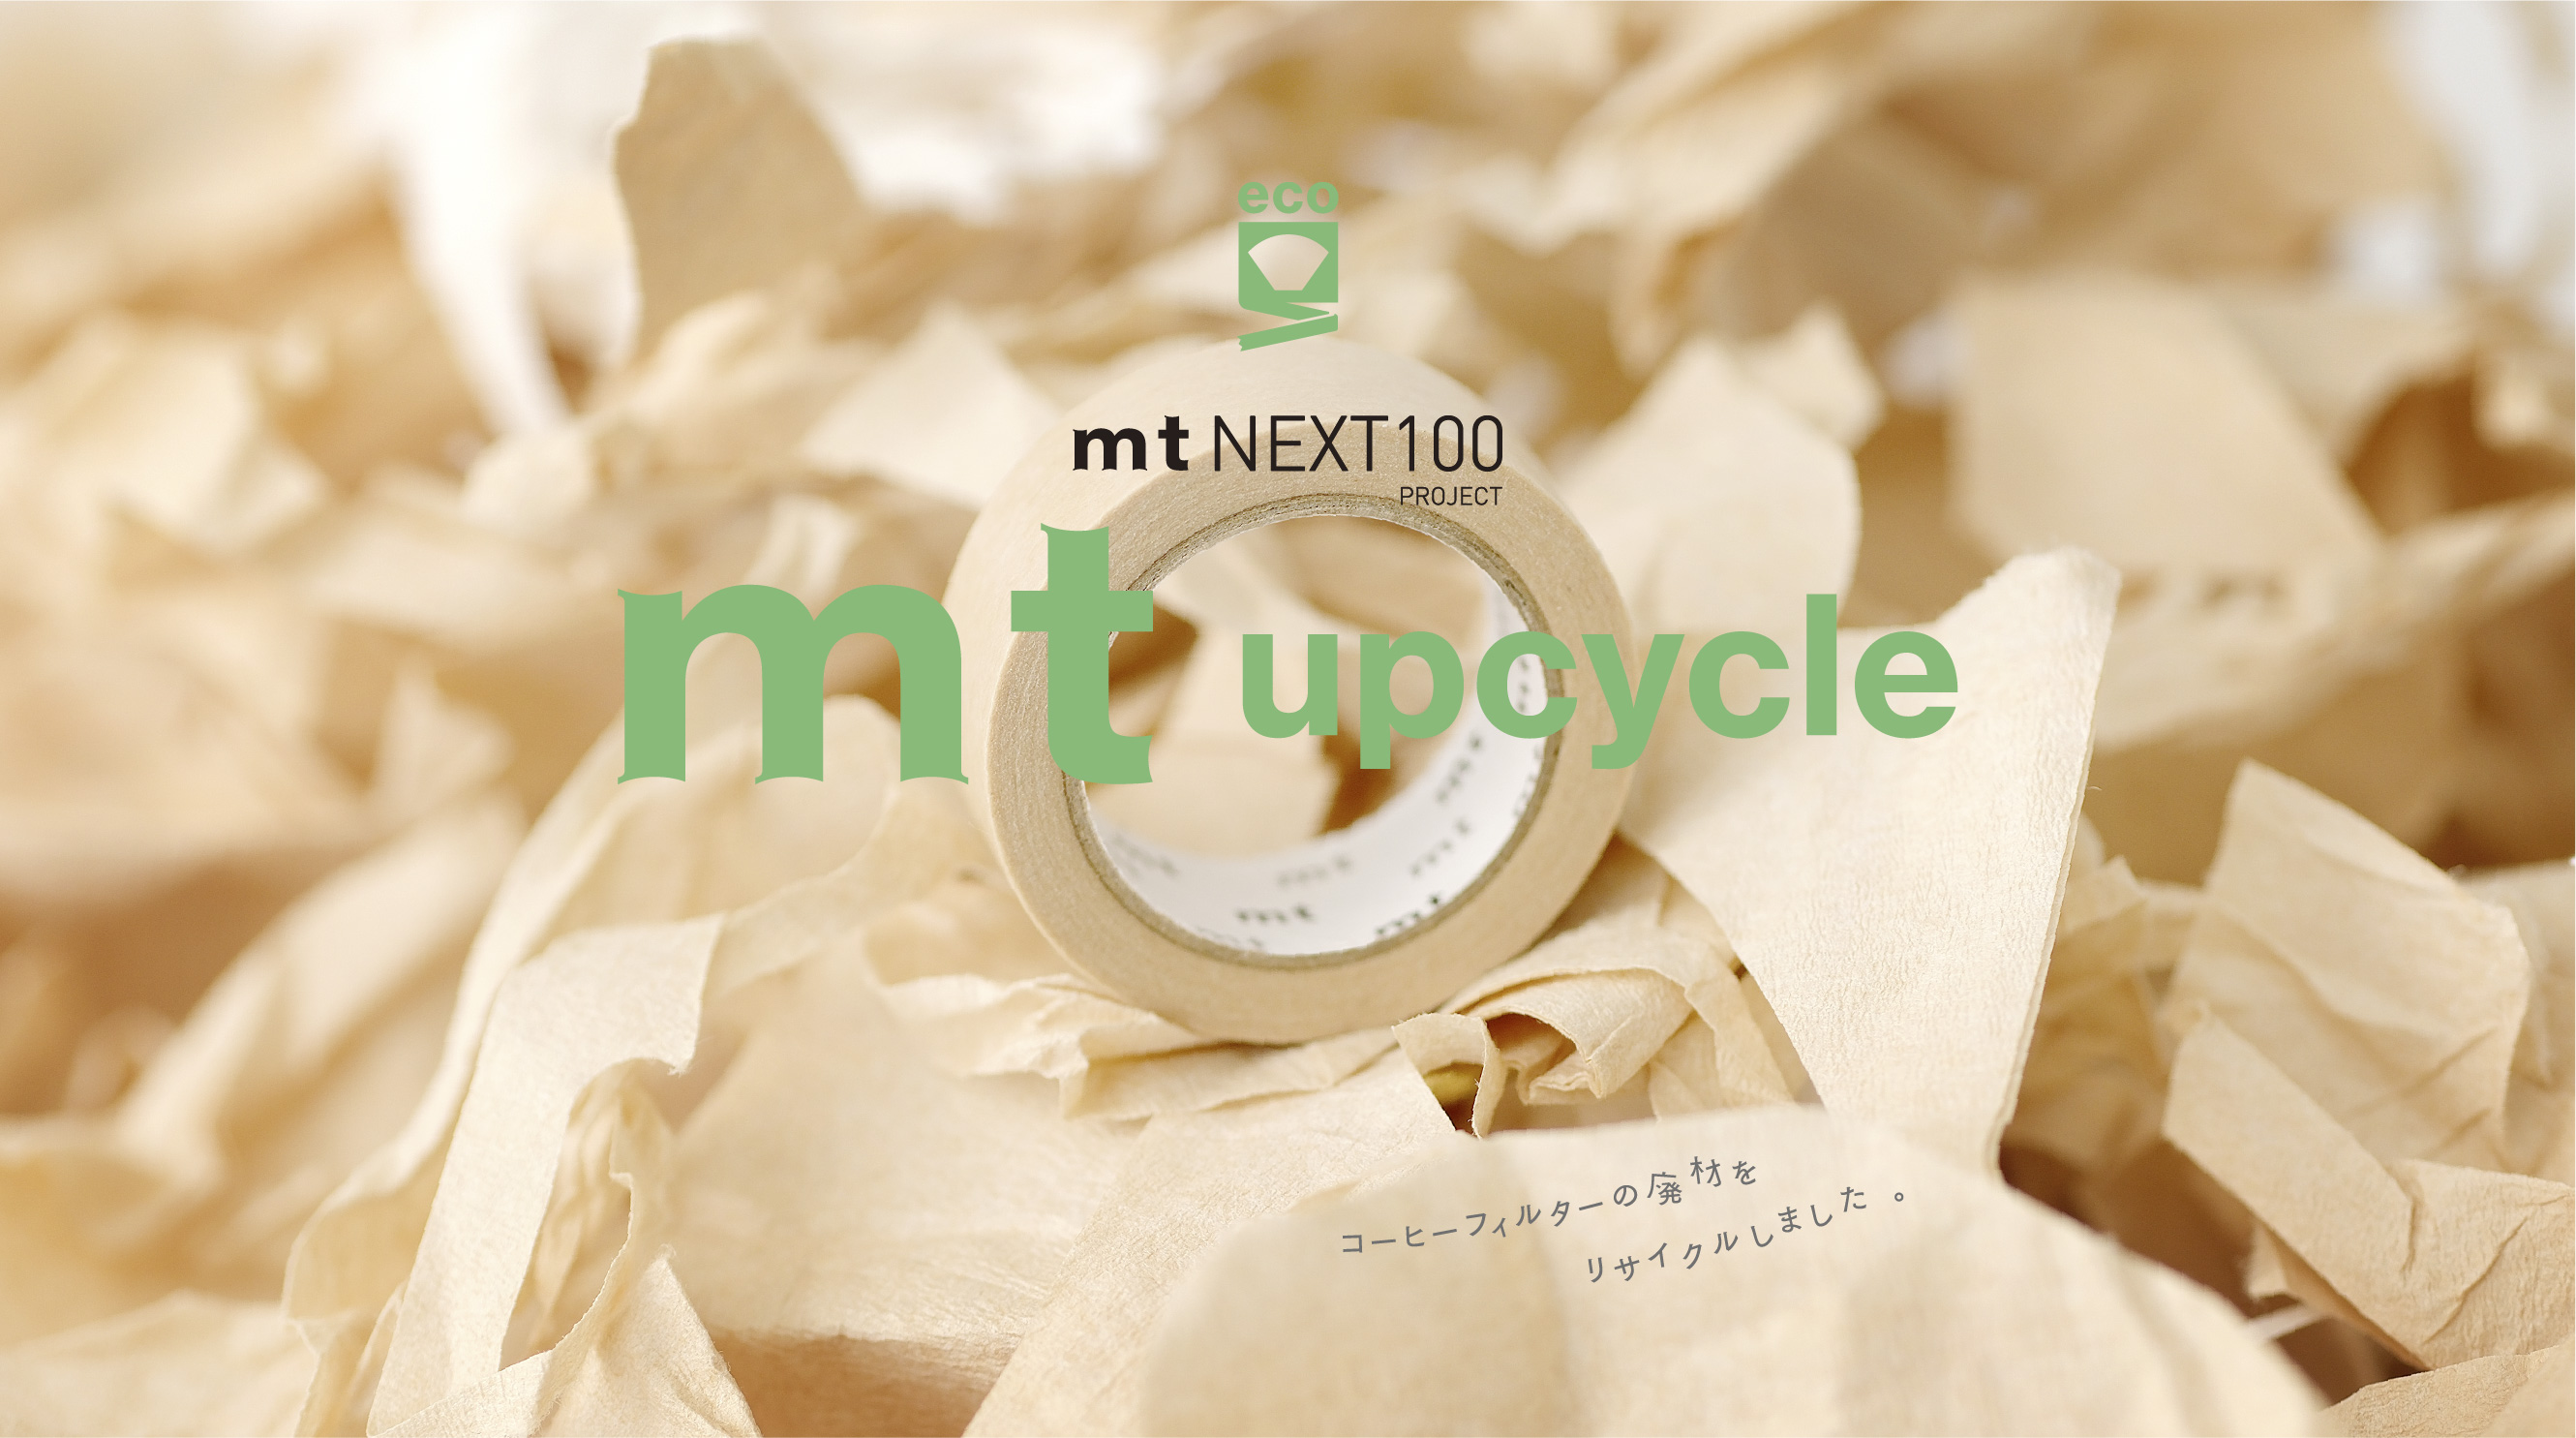 mt NEXT100 PROJECT mt upcycle